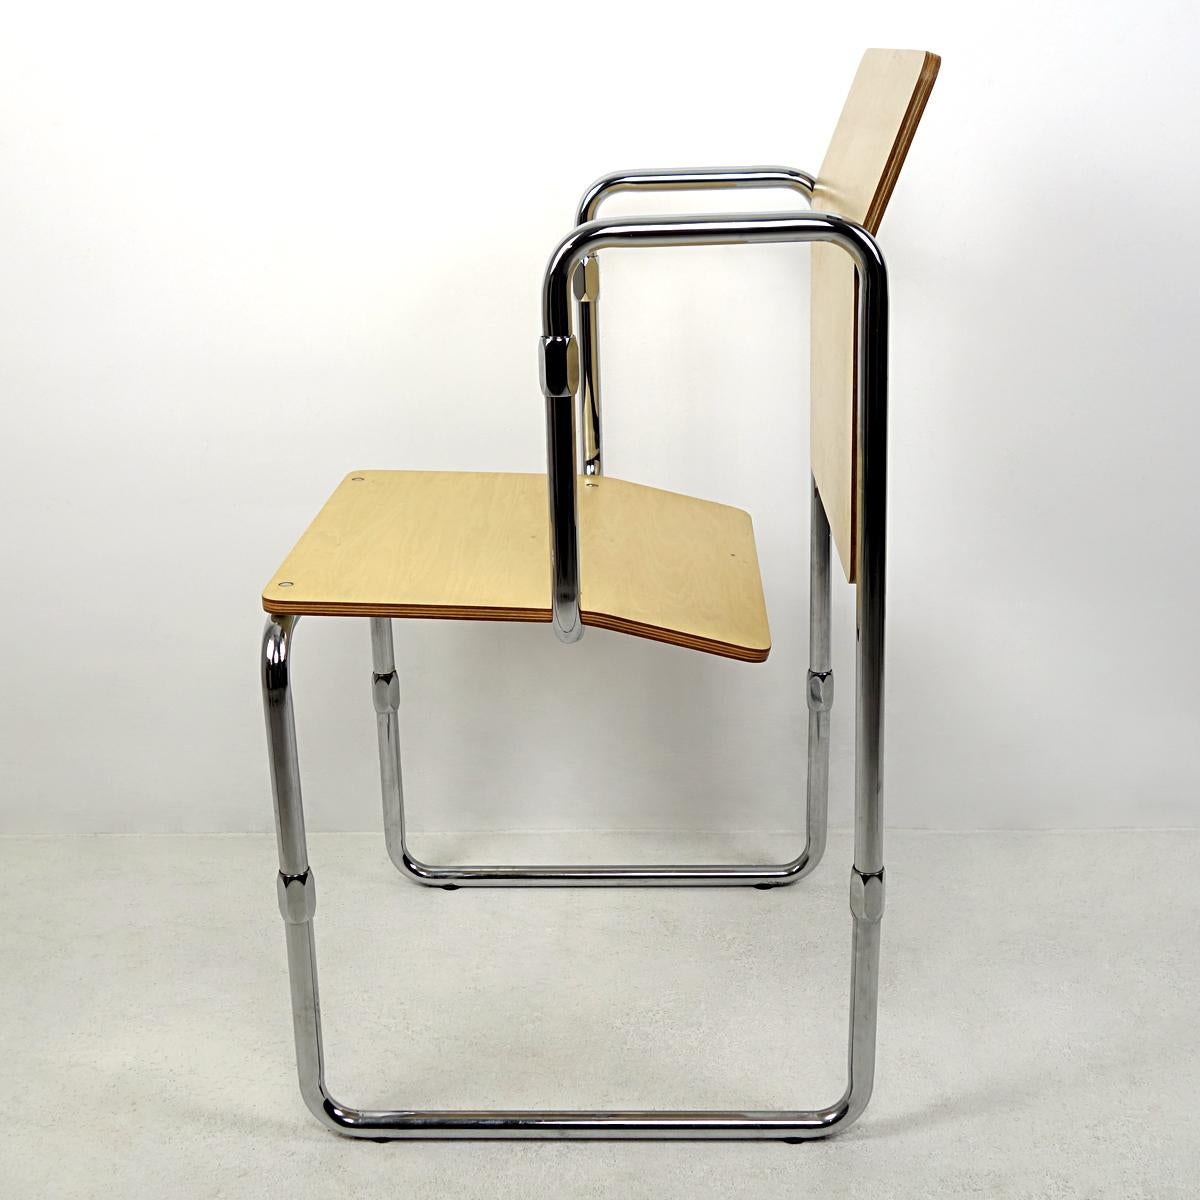 Dutch Modernist Hopmi Chair by Gerrit Rietveld Limited Edition Official Reproduction